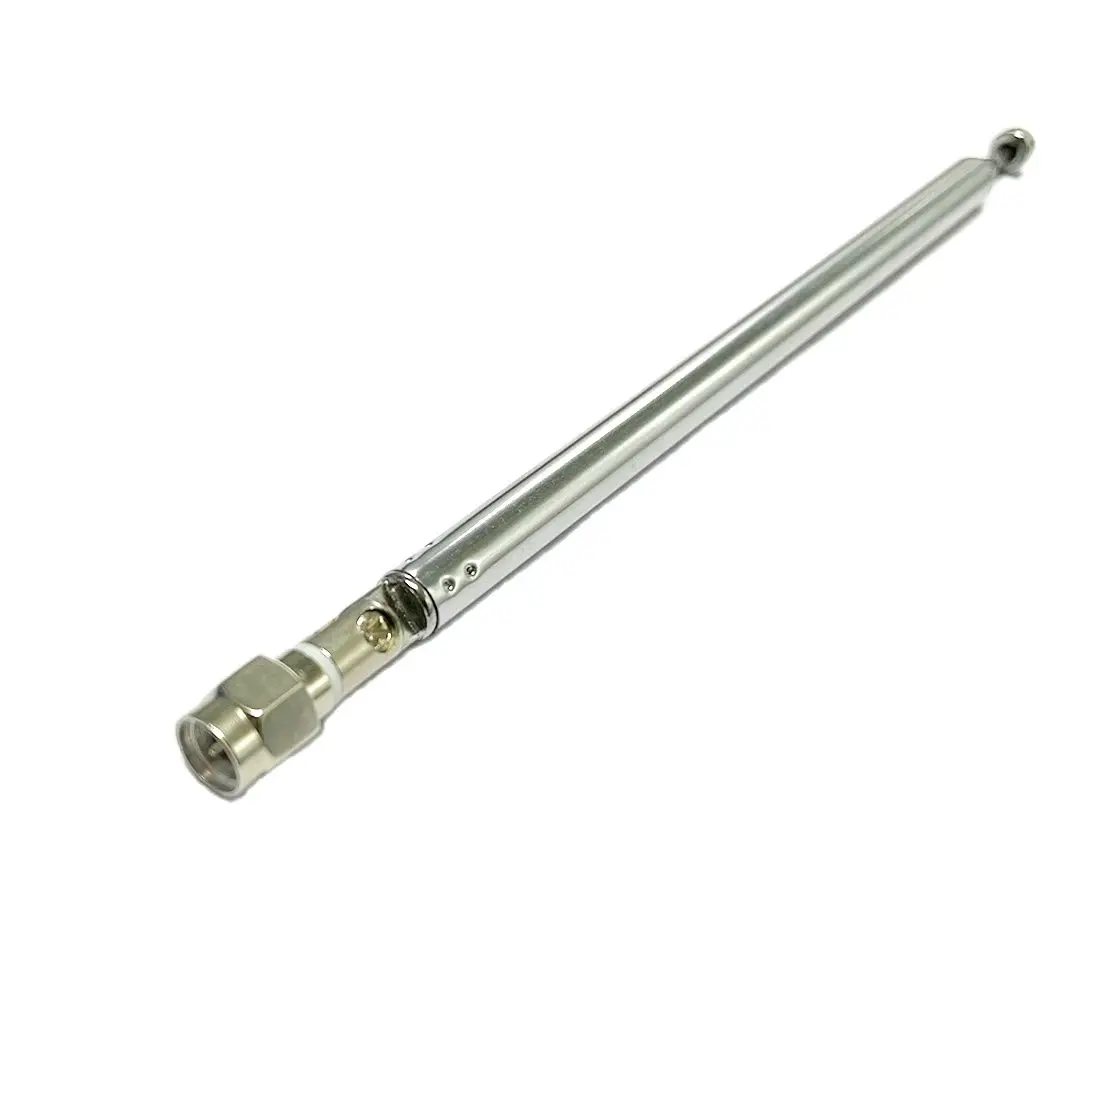 

1PC Replacement 164mm 7 Sections Telescopic Antenna SMA Male for Radio TV DIY NEW Wholesale